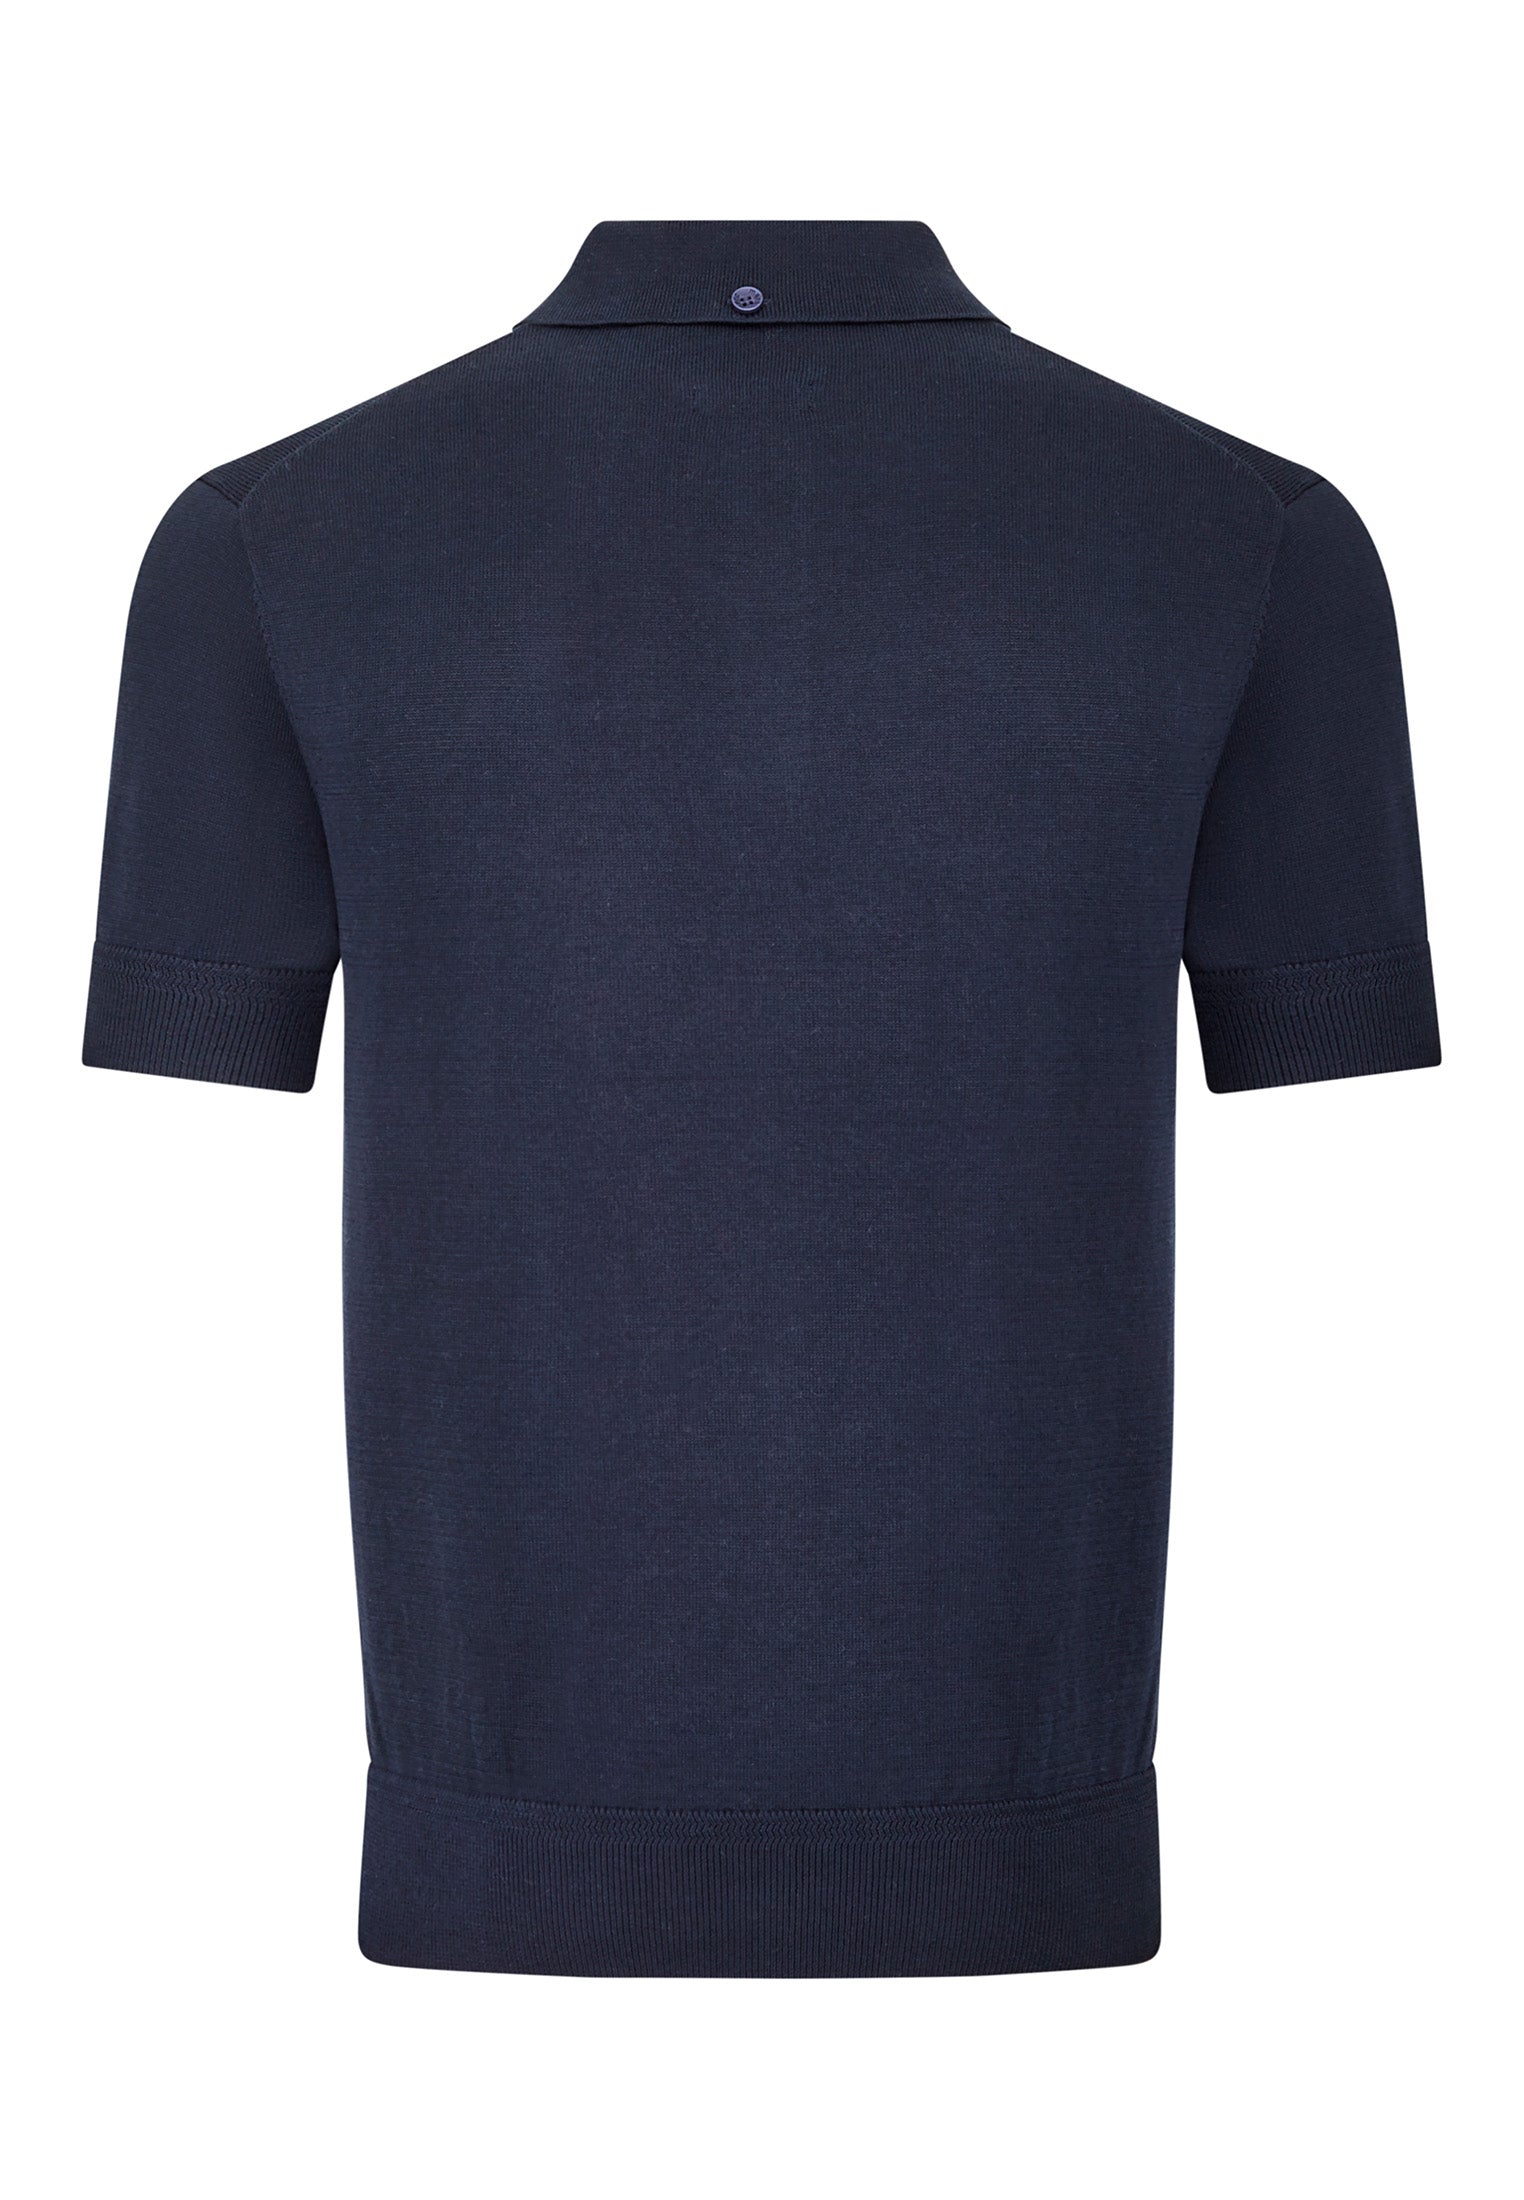 Super Soft Knitted Polo Shirt In Dark Blue by Merc